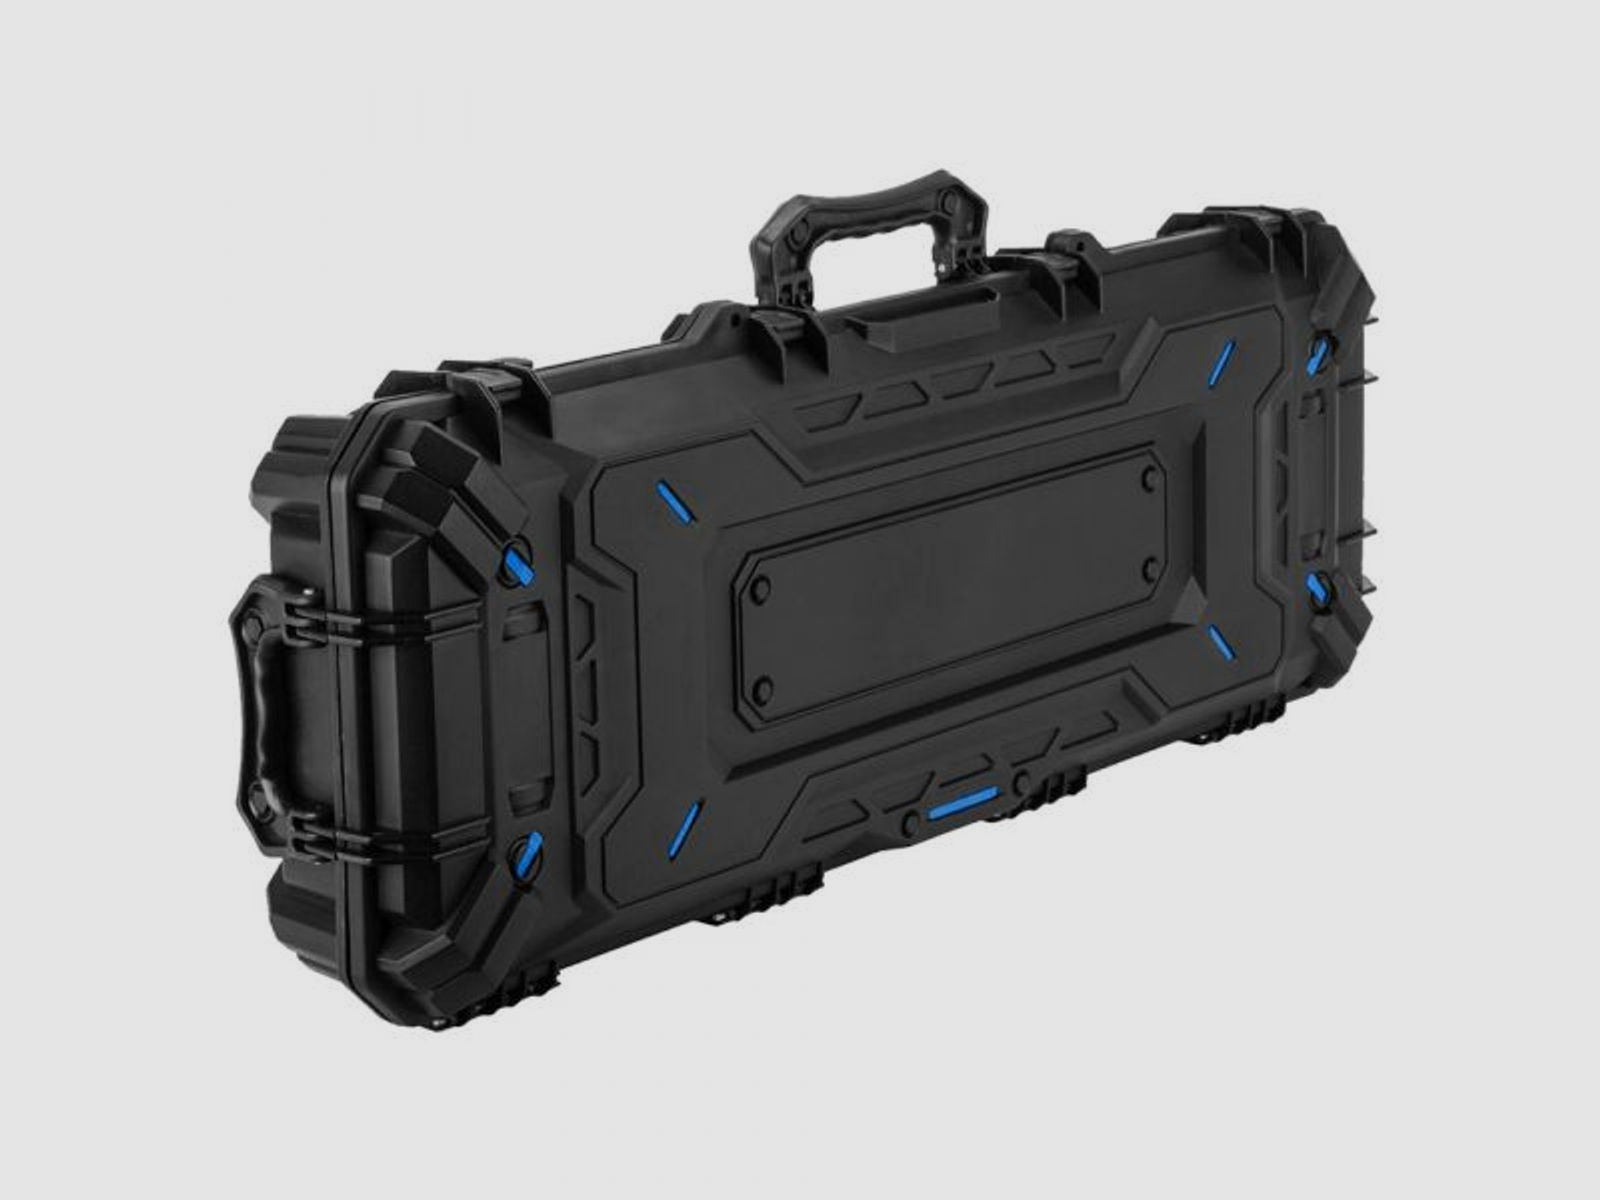 ASG ASG Waffenkoffer Tactical Waterproof Rifle Case